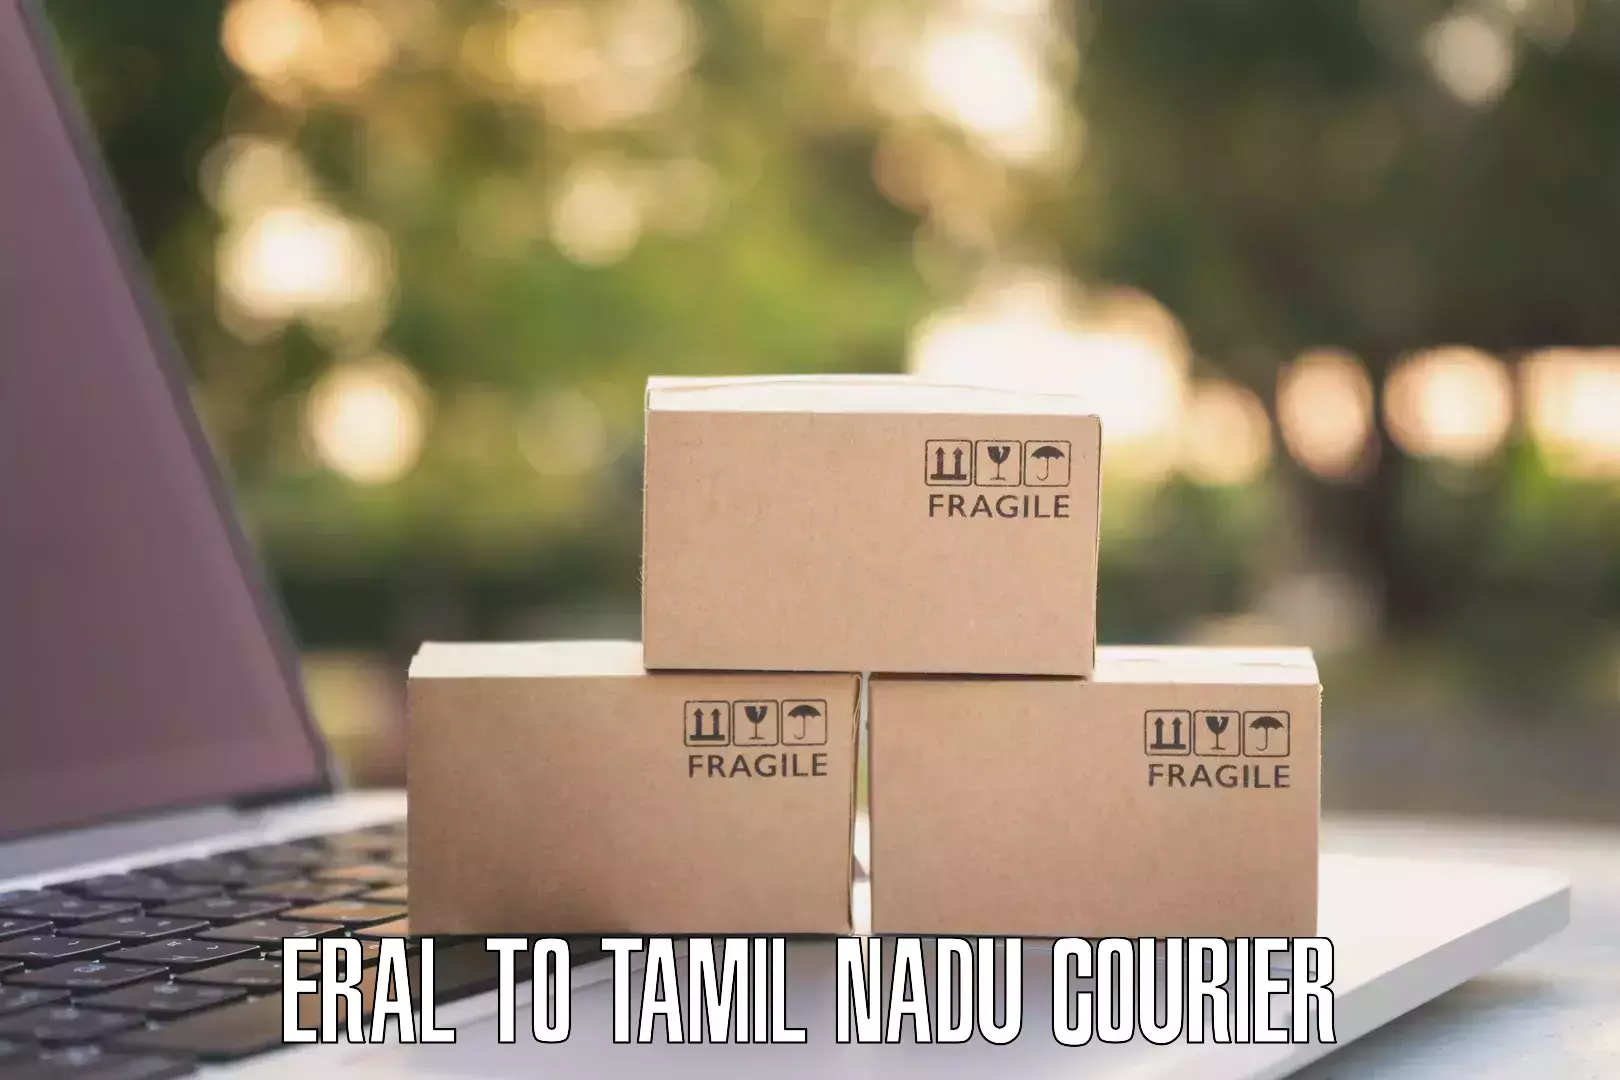 User-friendly courier app Eral to Eral